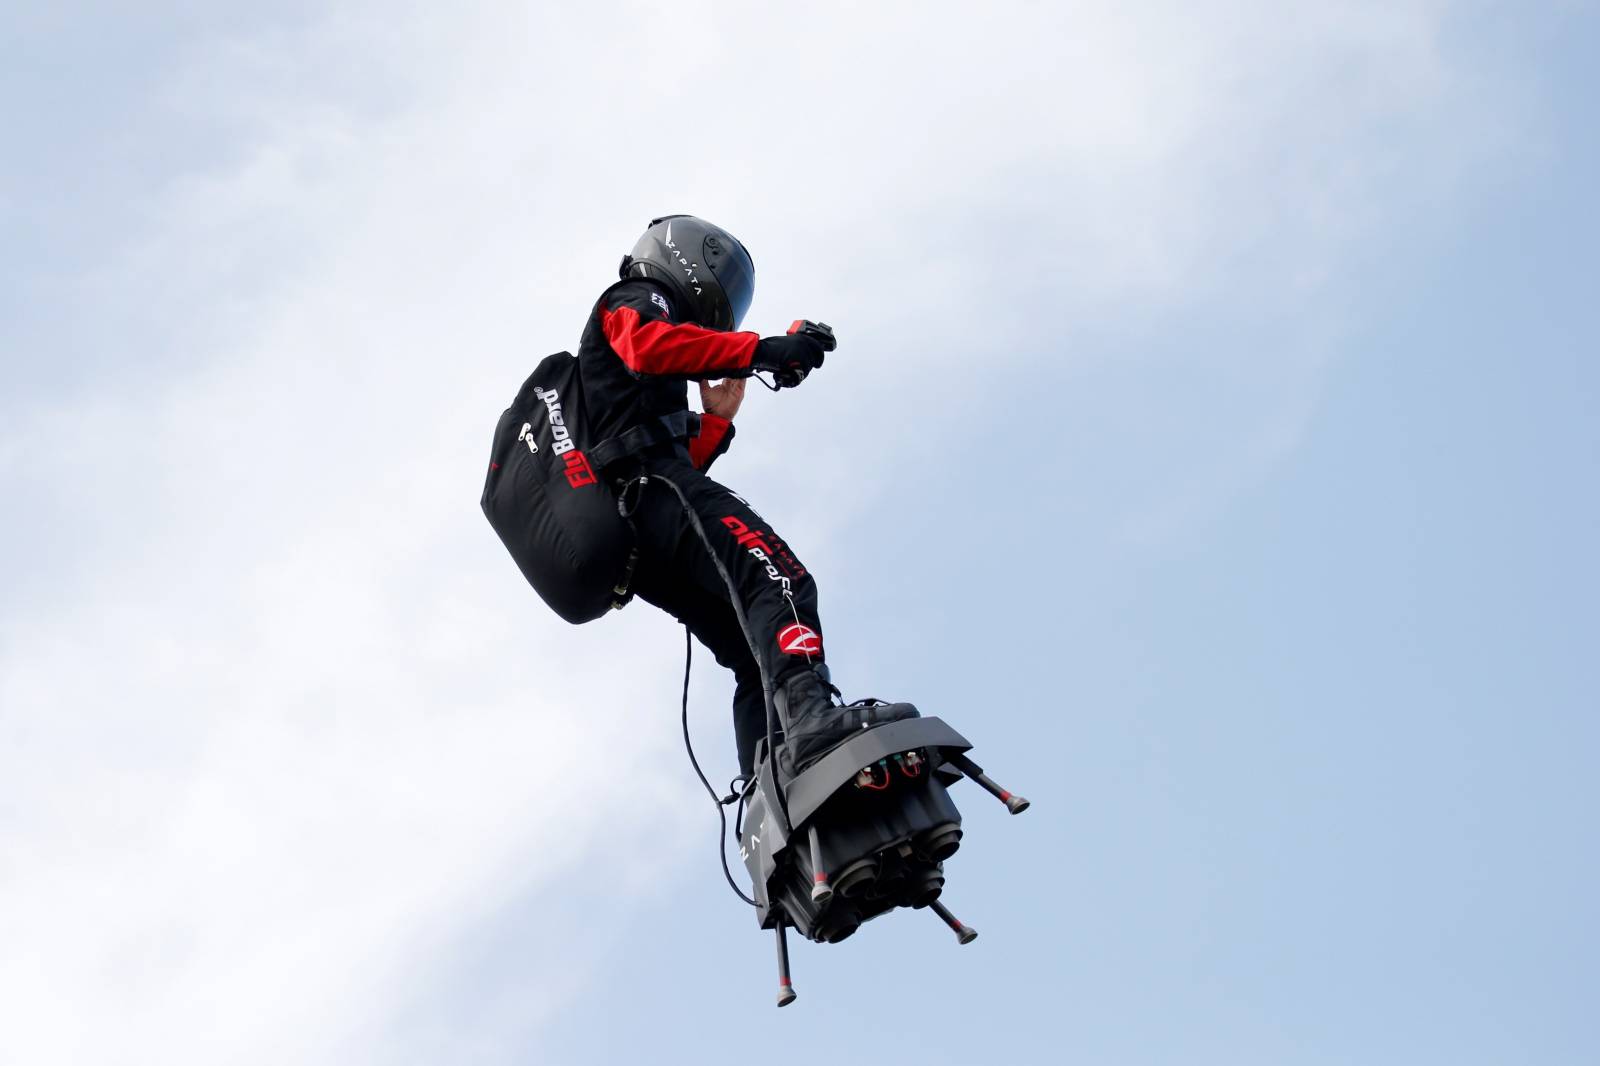 French inventor Franky Zapata lands on a Flyboard during a demonstration as he prepares to cross the English channel from Sangatte in France to Dover, at the Saint-Inglevert aerodrome